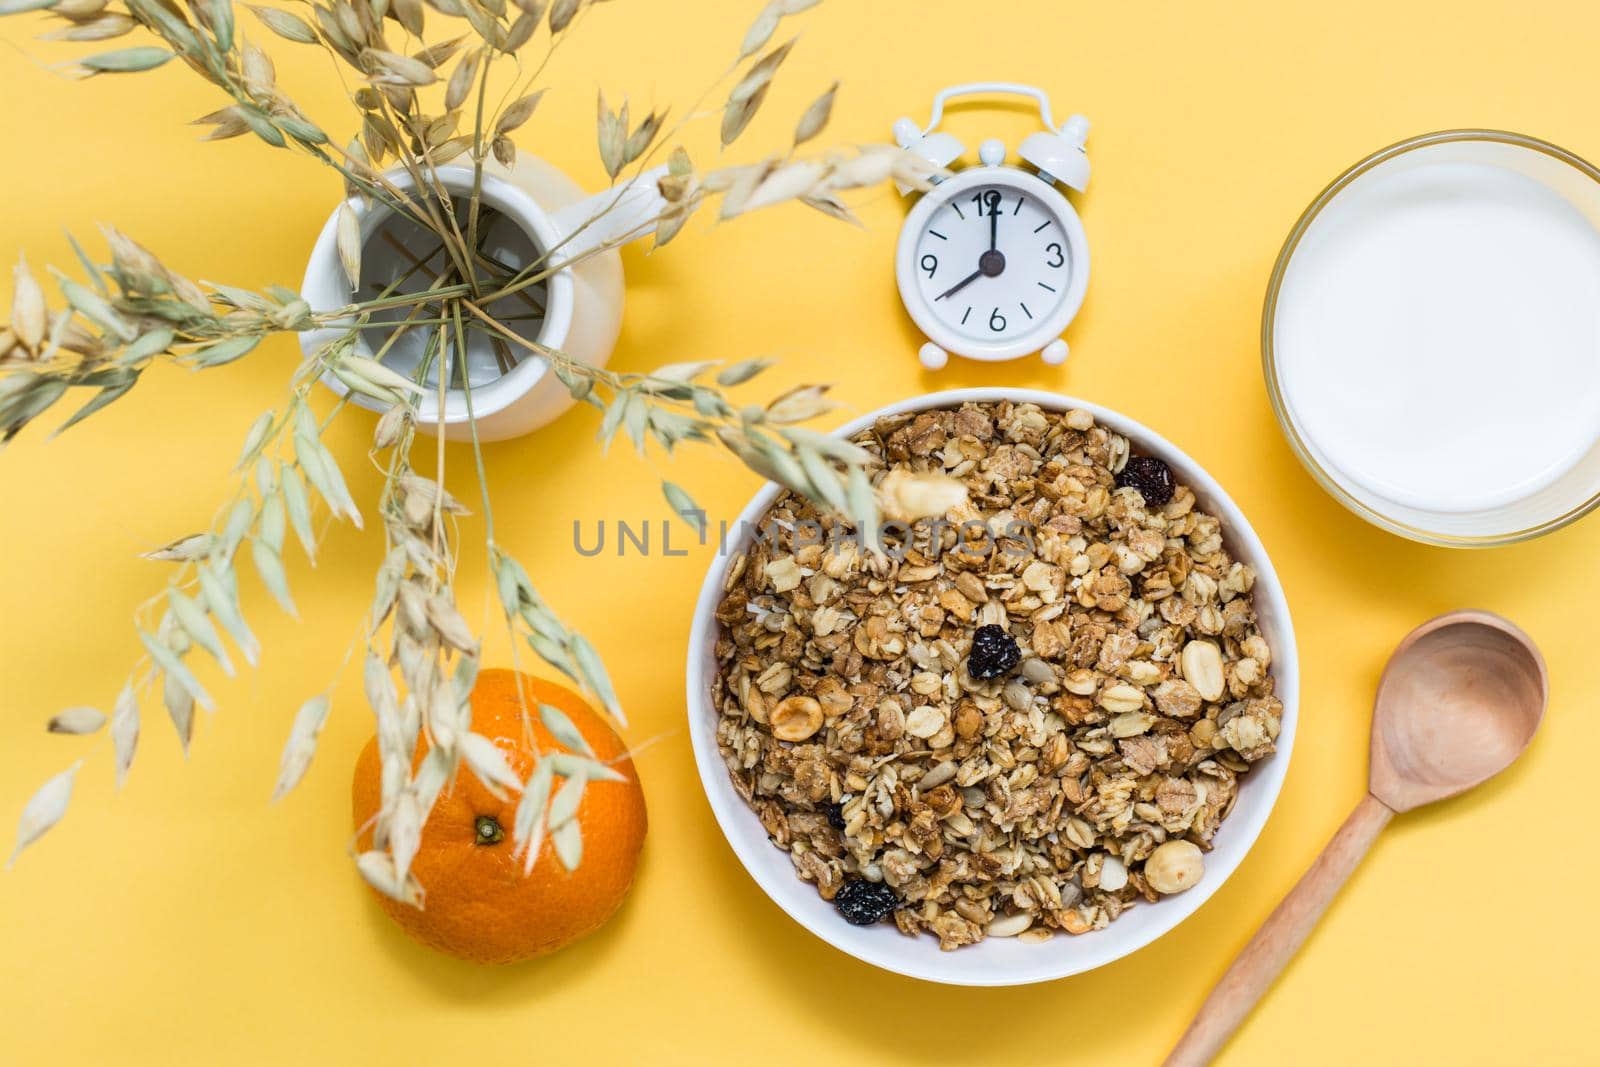 Healthy hearty breakfast. Baked granola of oats, nuts and raisins in a bowl, a glass of milk, an orange and an alarm clock on a yellow background. Top view